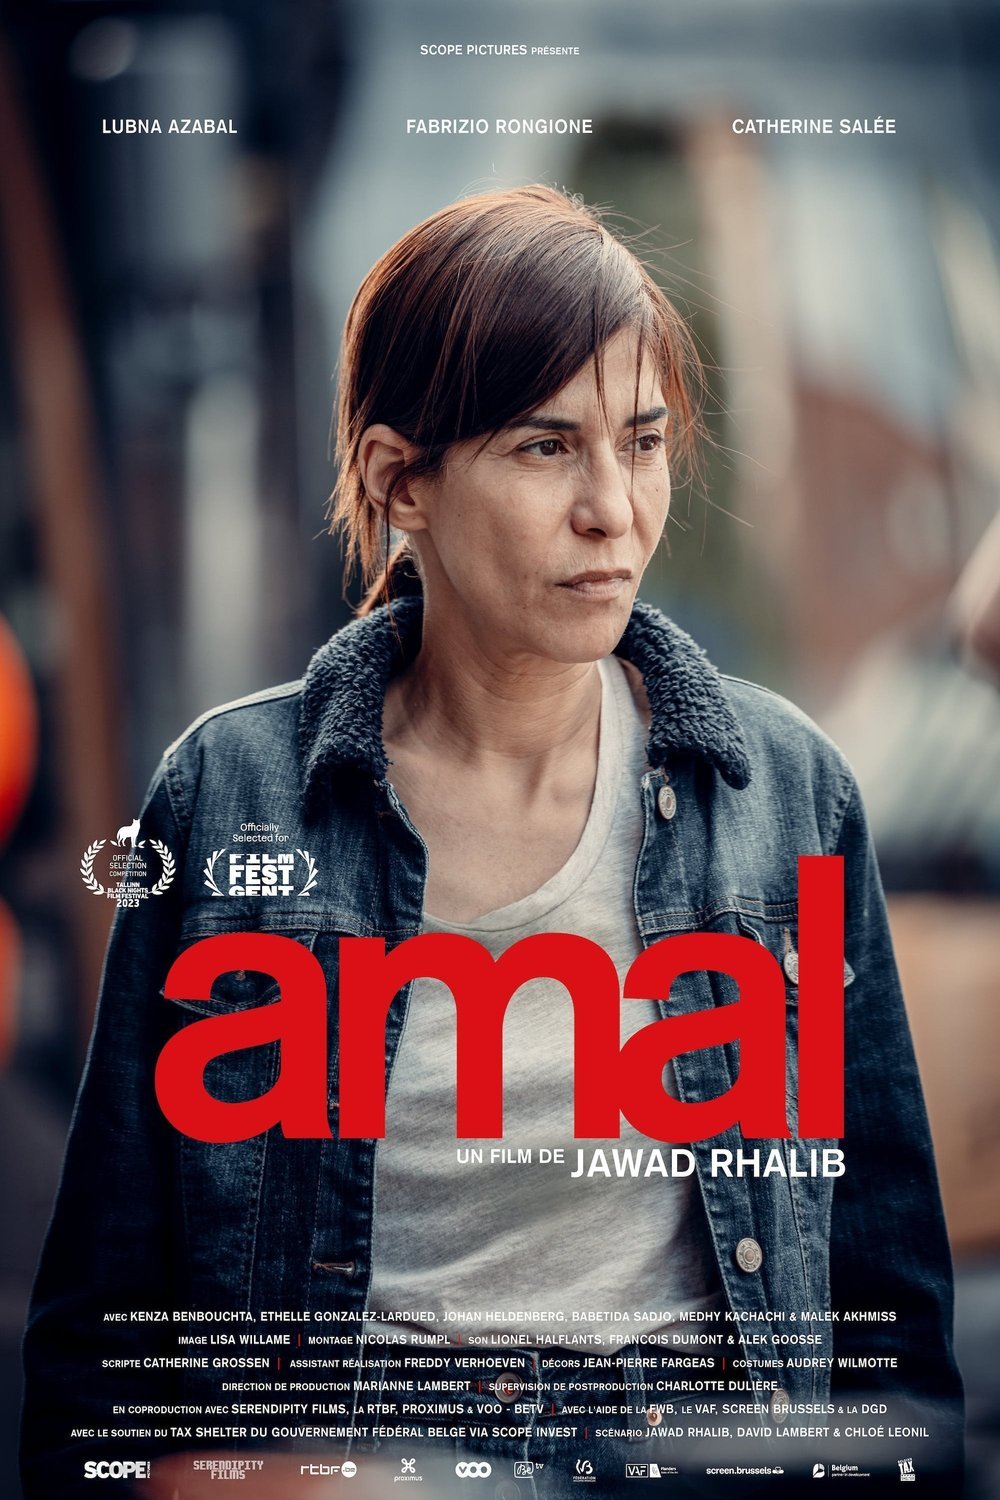 Poster of the movie Amal